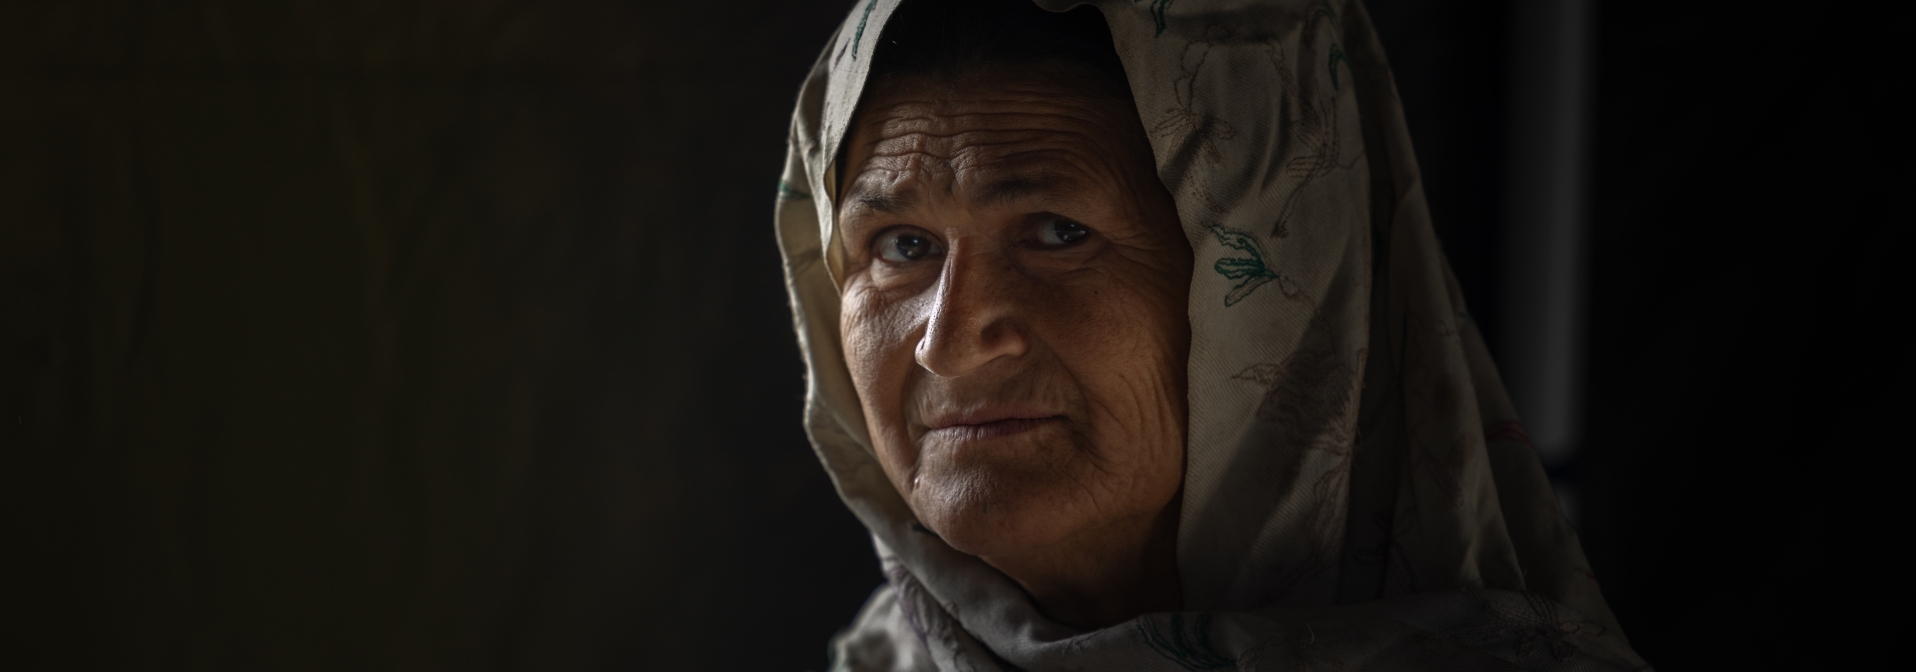 Jamale, a mother of six, returns to Afghanistan after twenty years only to discover her old home was destroyed, unsure where to find shelter. © Mina Nazari/IOM 2023